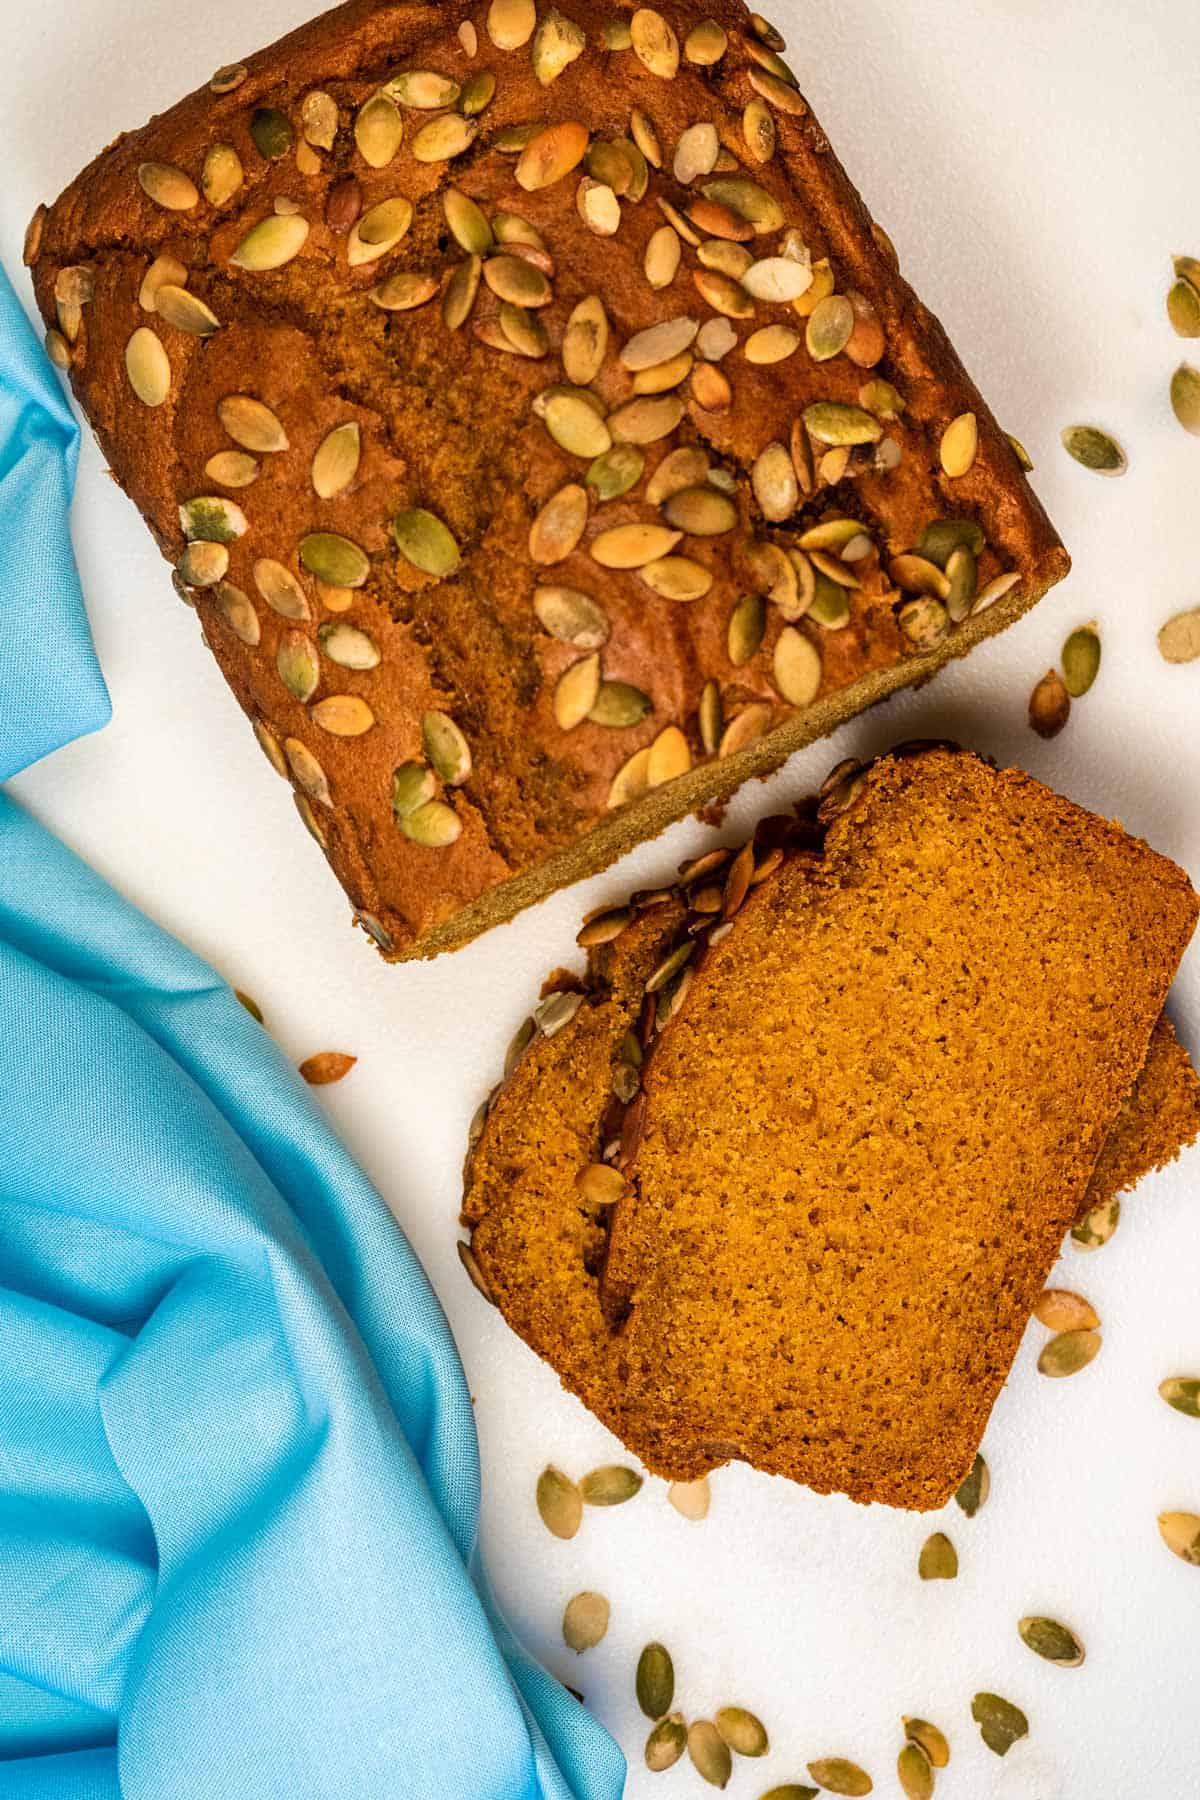 Overhead view of a loaf and slices of vegan pumpkin bread.